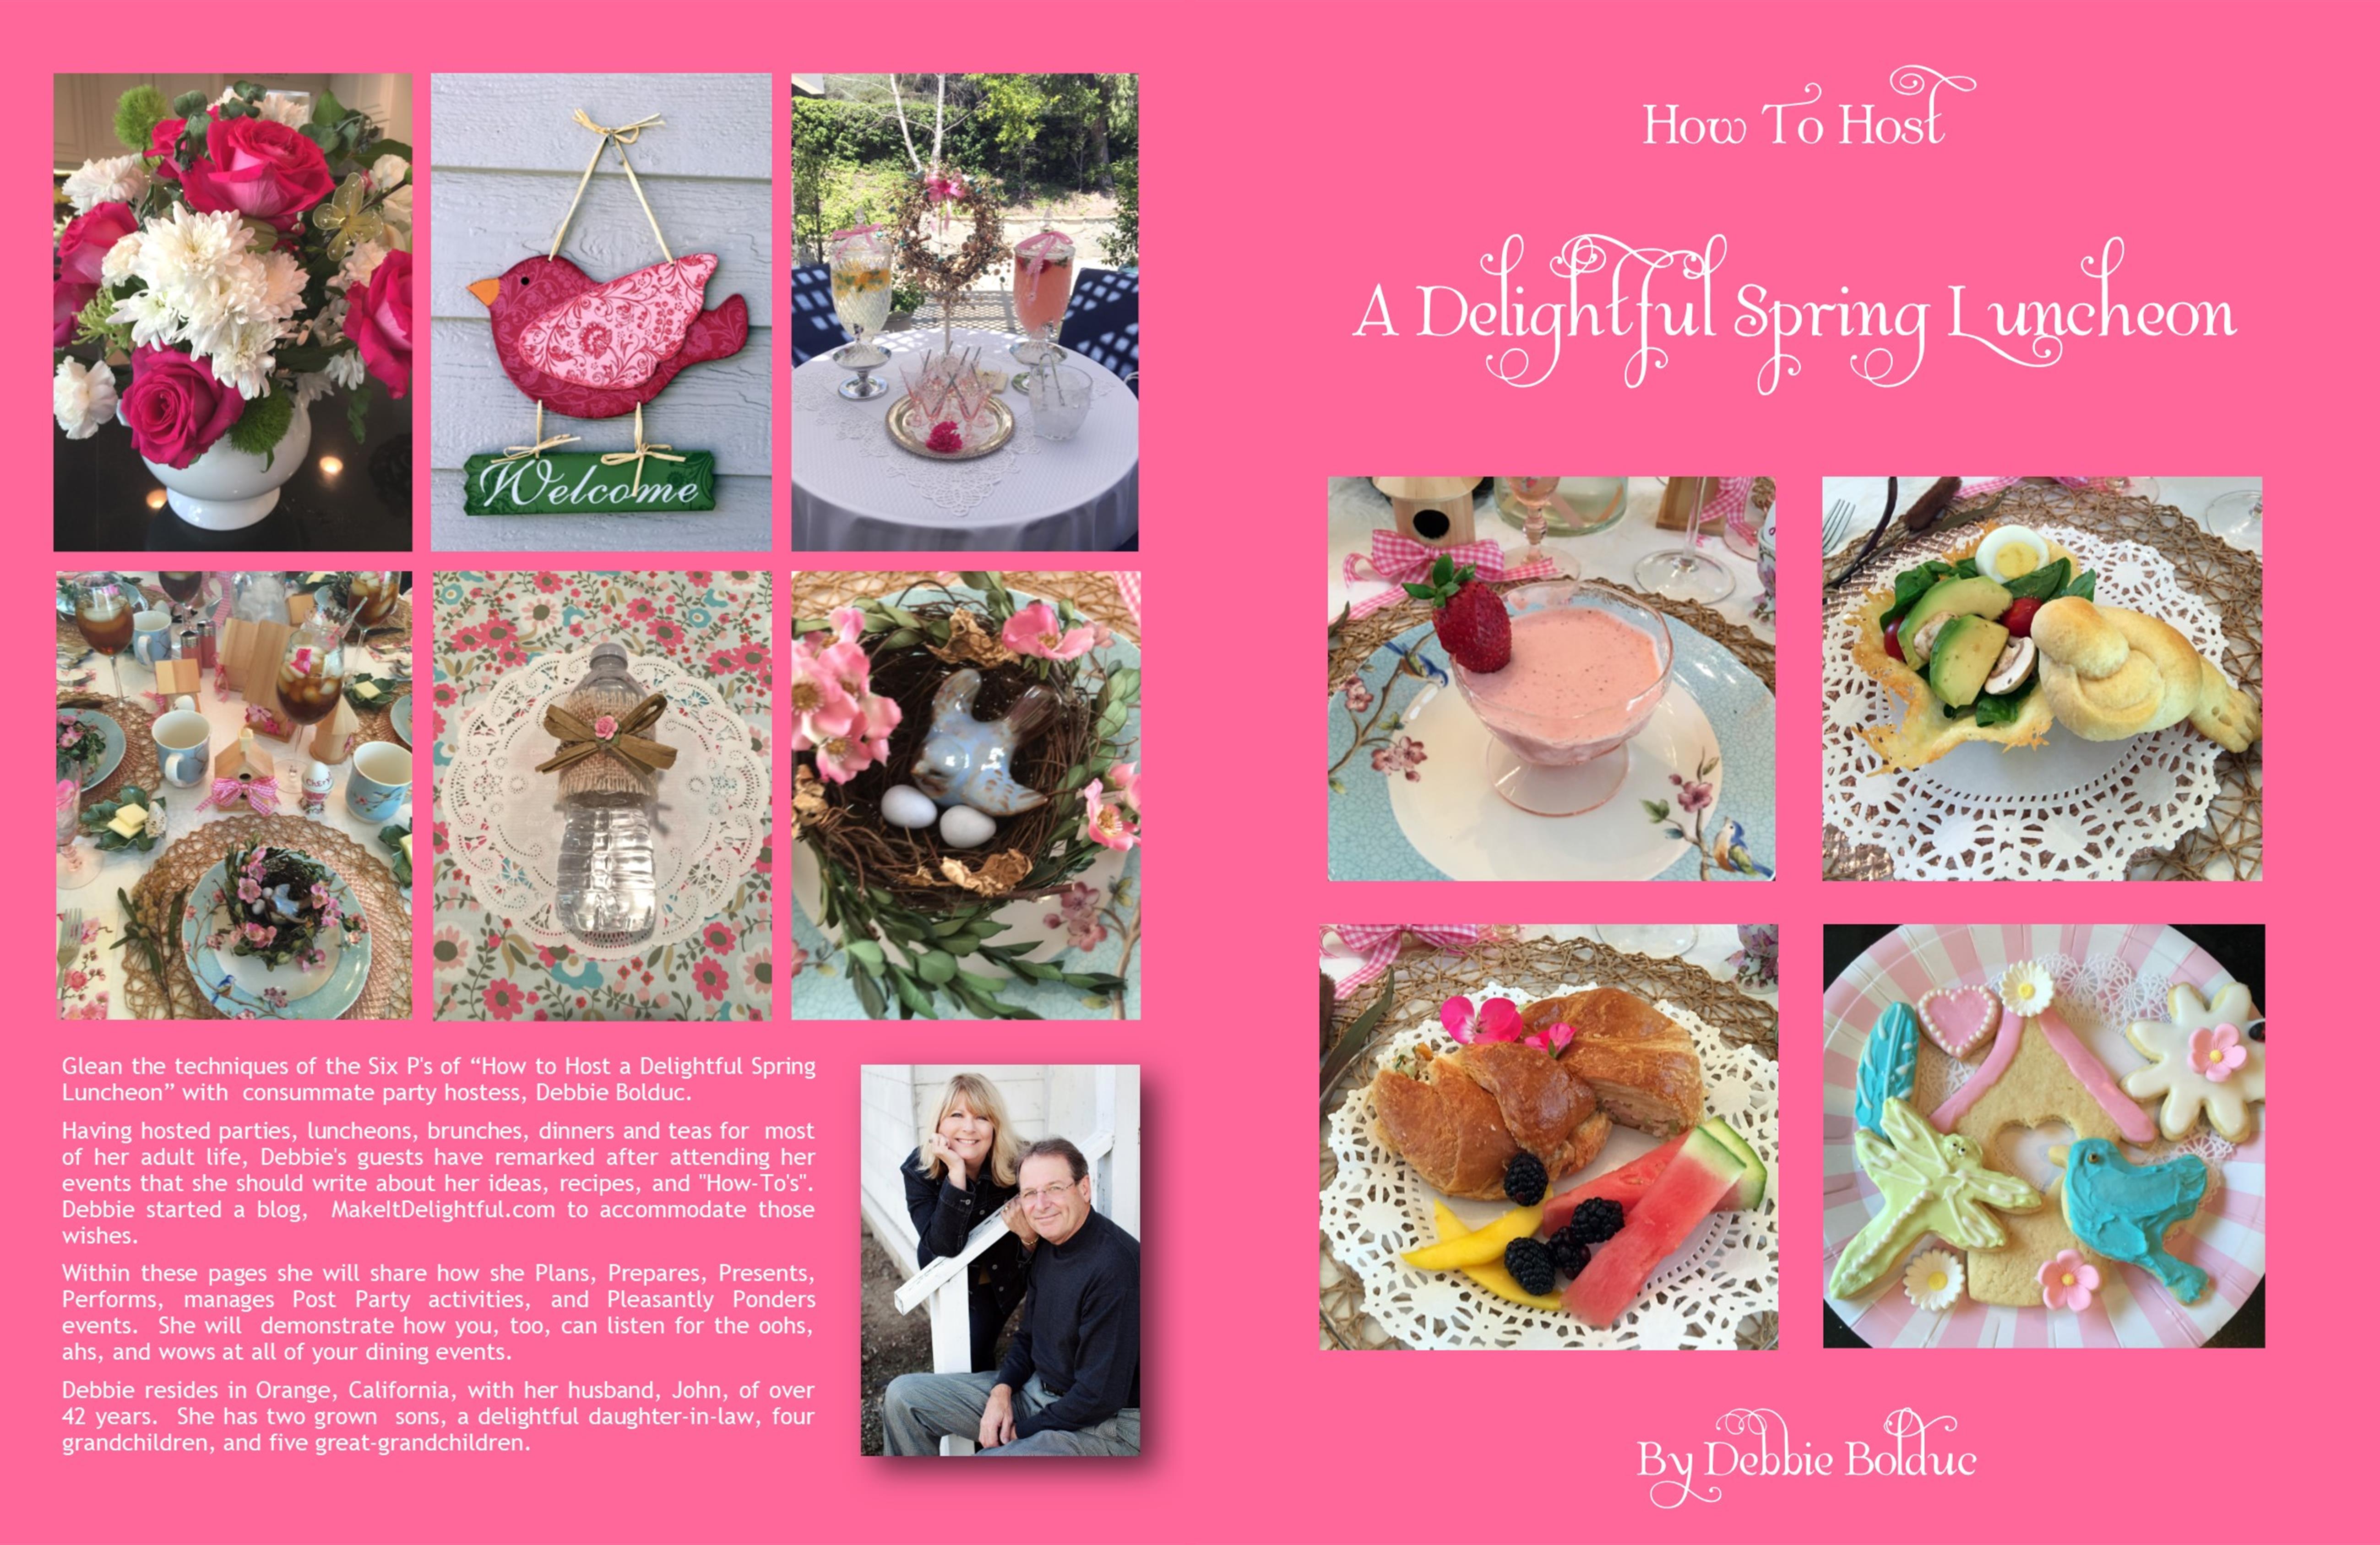 How To Host A Delightful Spring Luncheon cover image